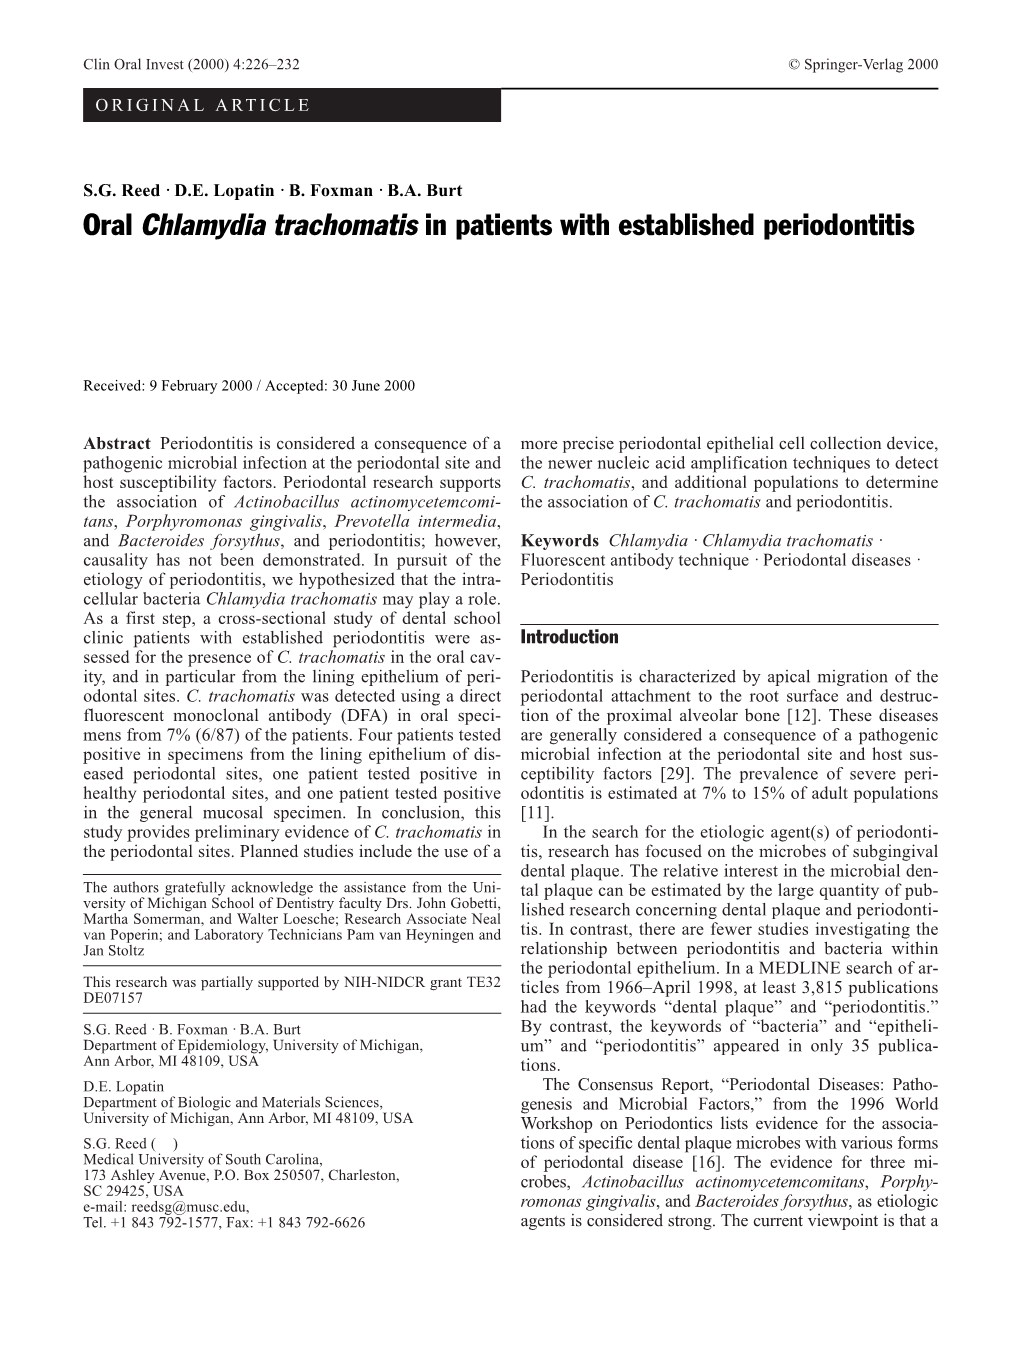 Oral Chlamydia Trachomatis in Patients with Established Periodontitis